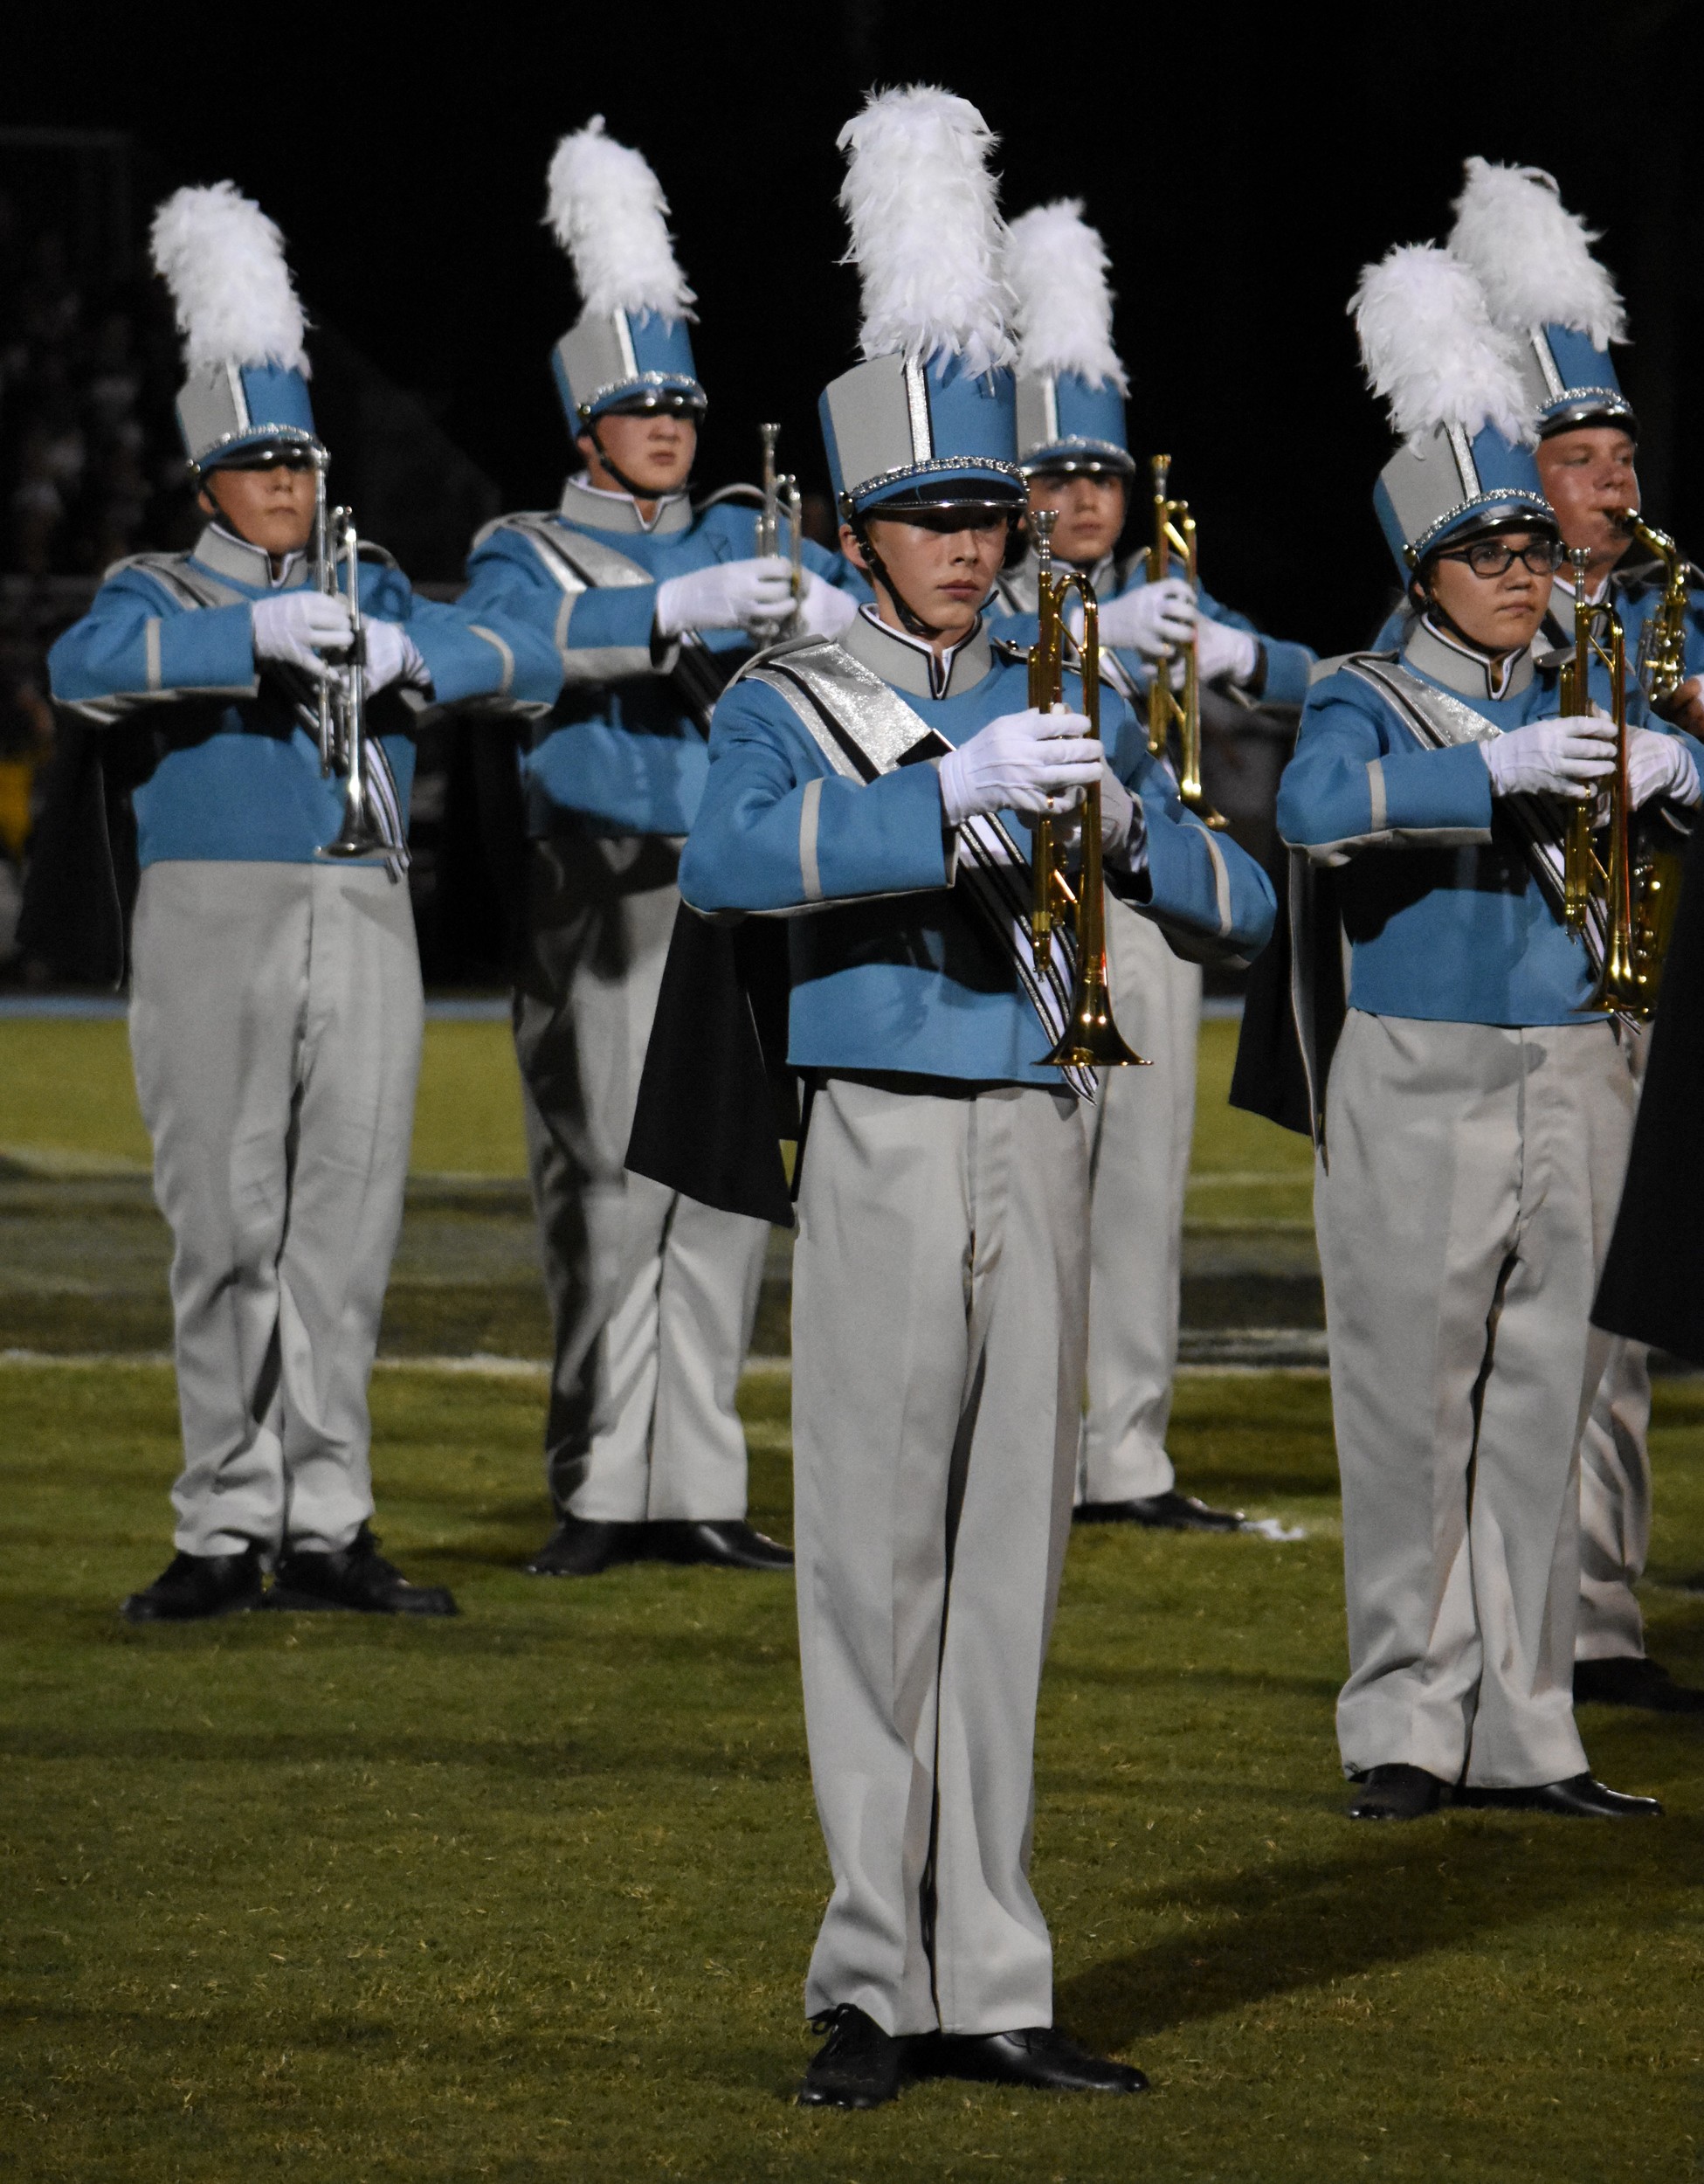 The PVHS Band trumpet section performs at the Sept. 9 football game half-time versus Oakleaf